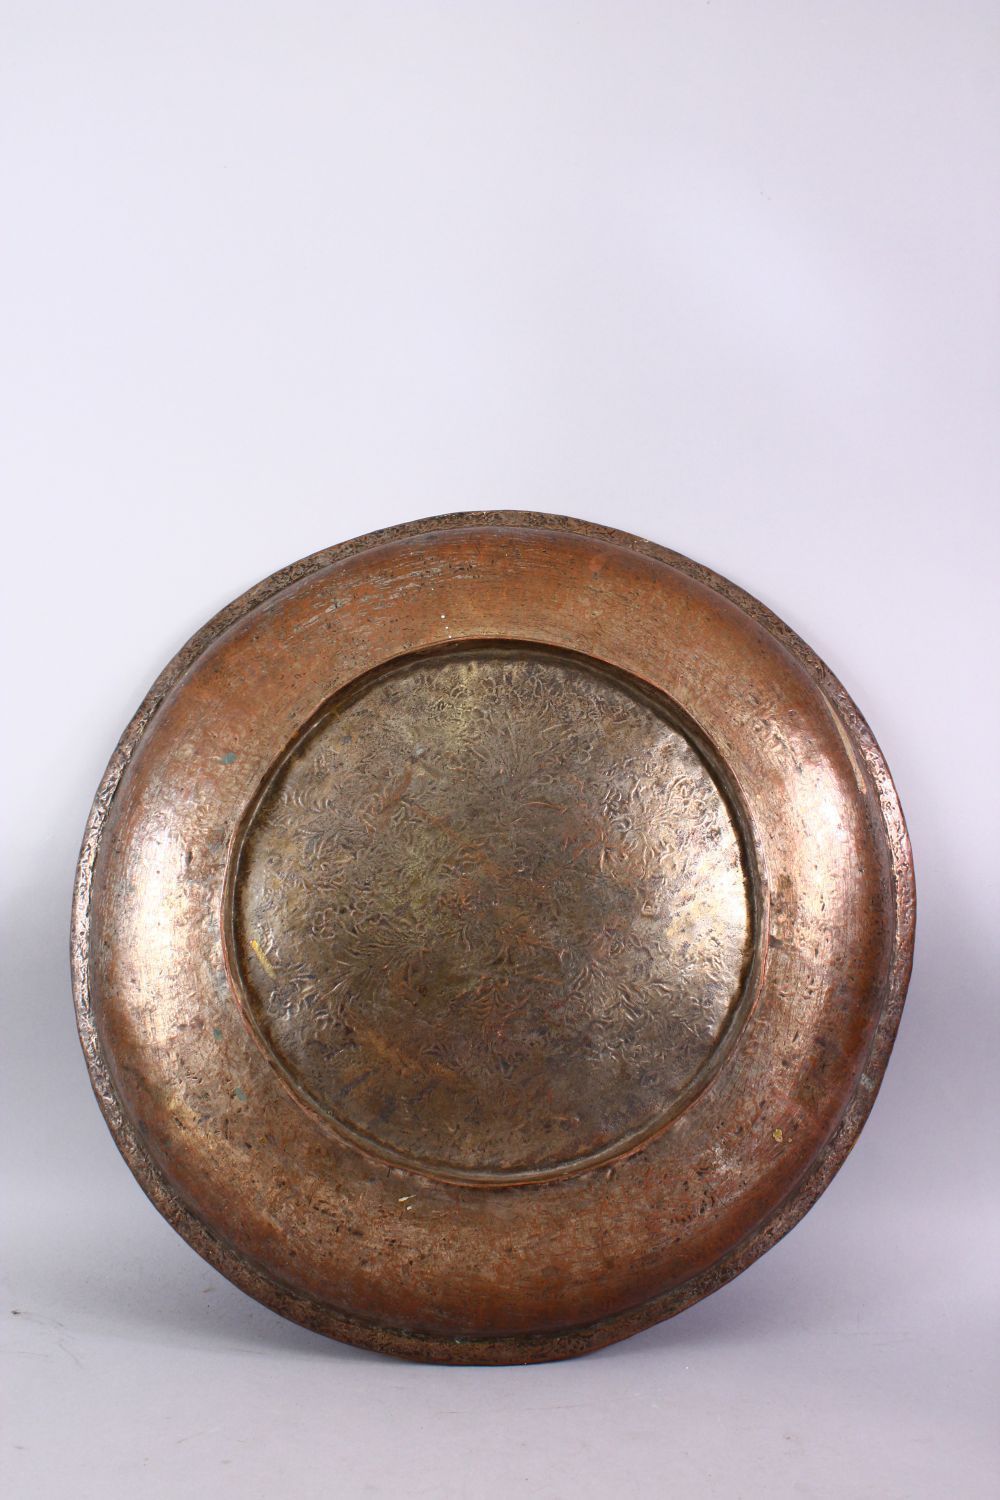 A LARGE SILVERED COPPER PERSIAN BOWL, the bowl with floral motif decoration. 46.5cm. - Image 6 of 6